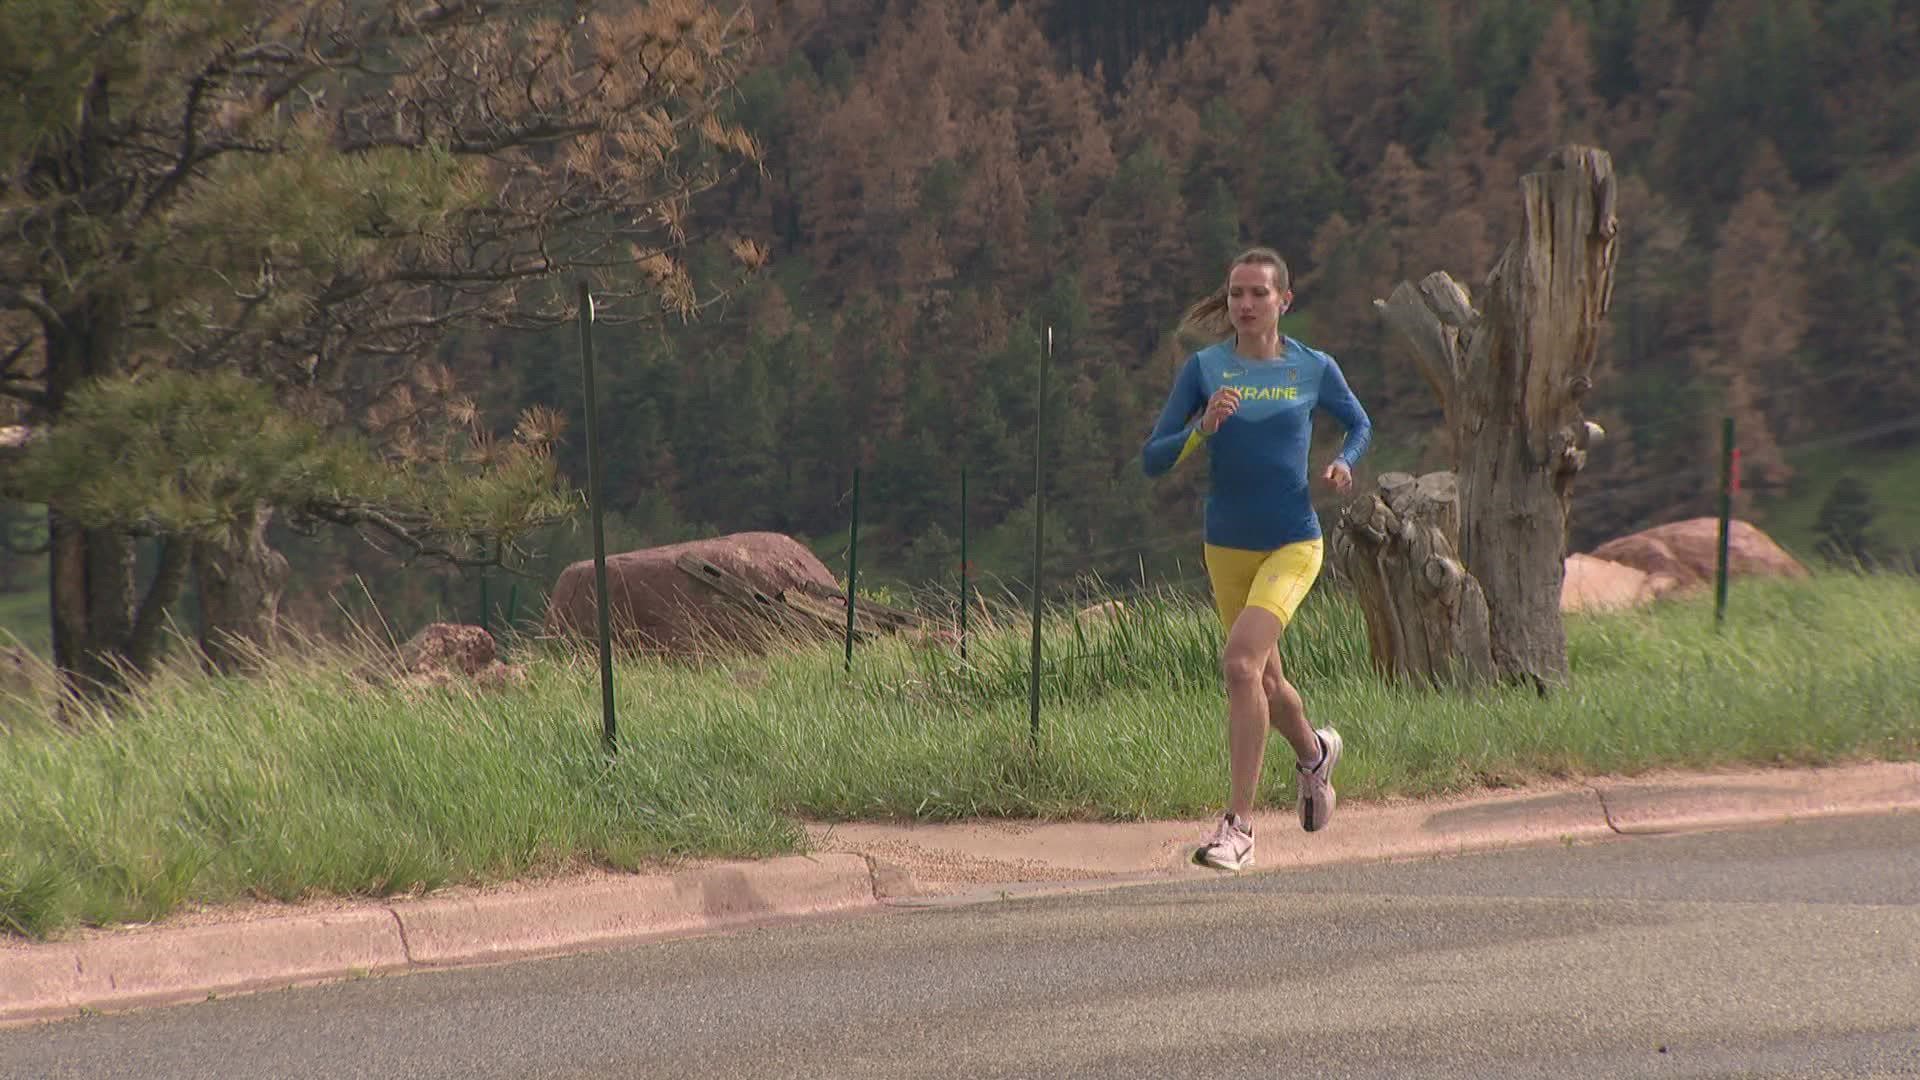 Monday’s BolderBoulder will see thousands of people running through the city. For a pair of Ukrainian women, just getting to the starting line has been a challenge.